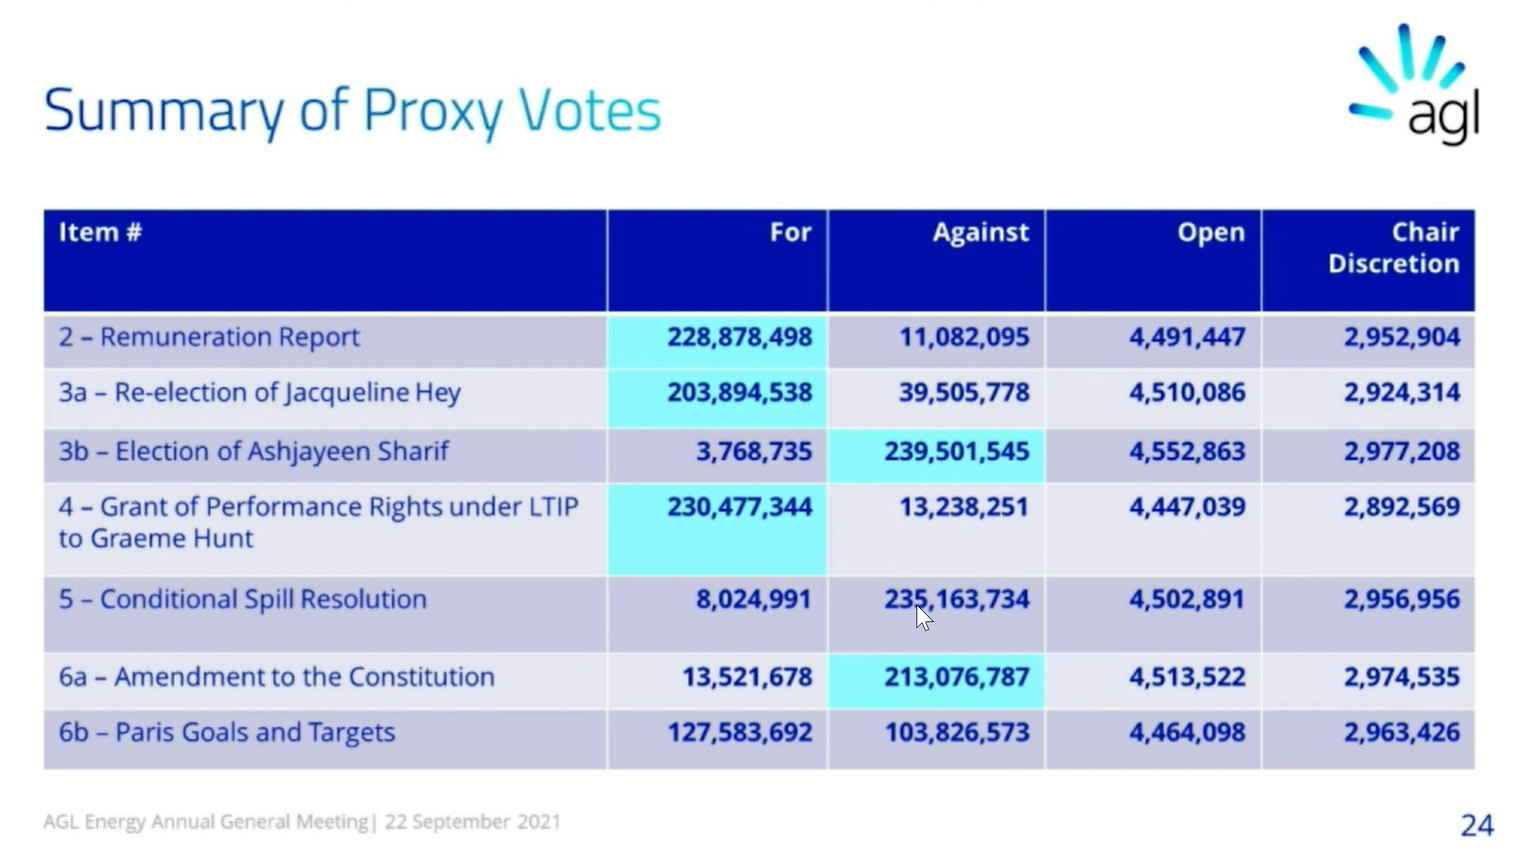 Summary of proxy votes from AGL AGM